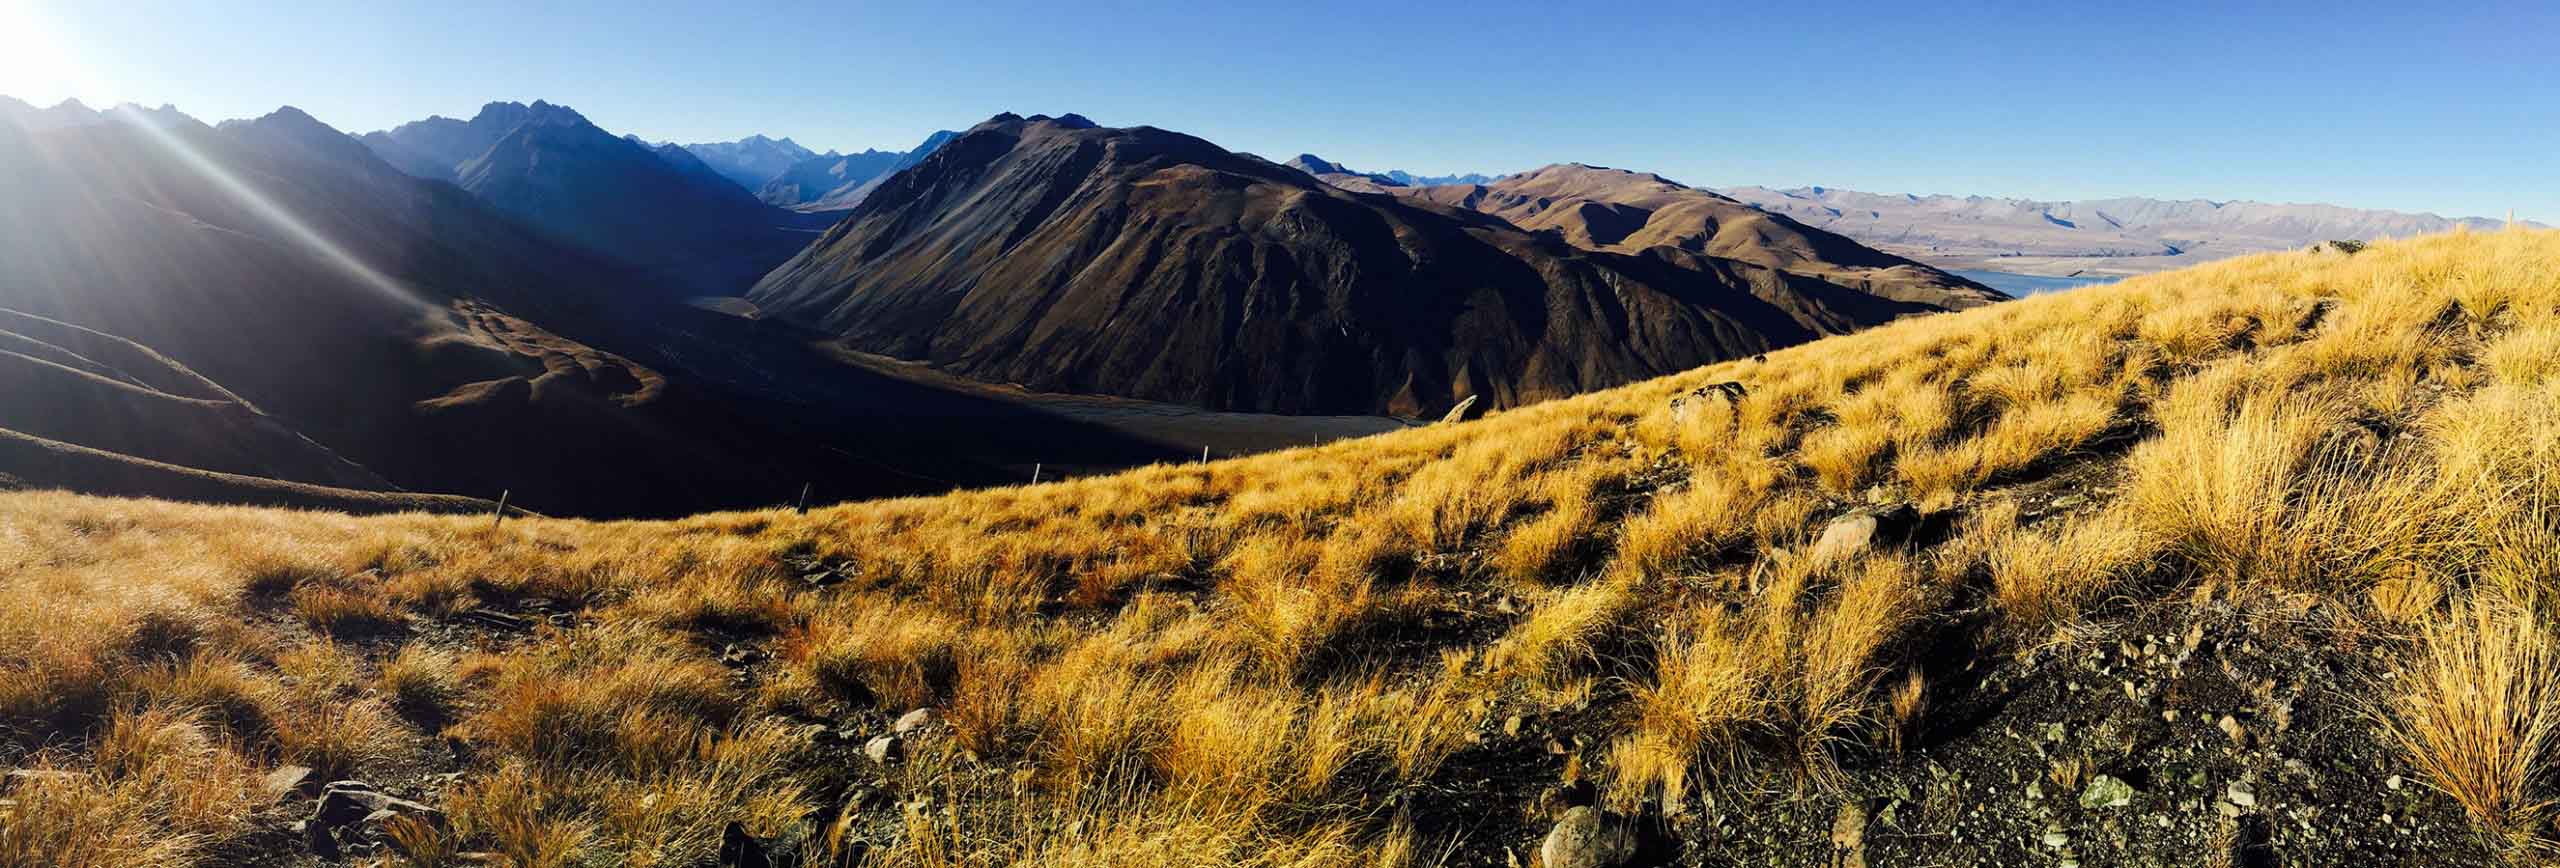 Panoramic image of tussock covered mountains in the Mackenzie Country